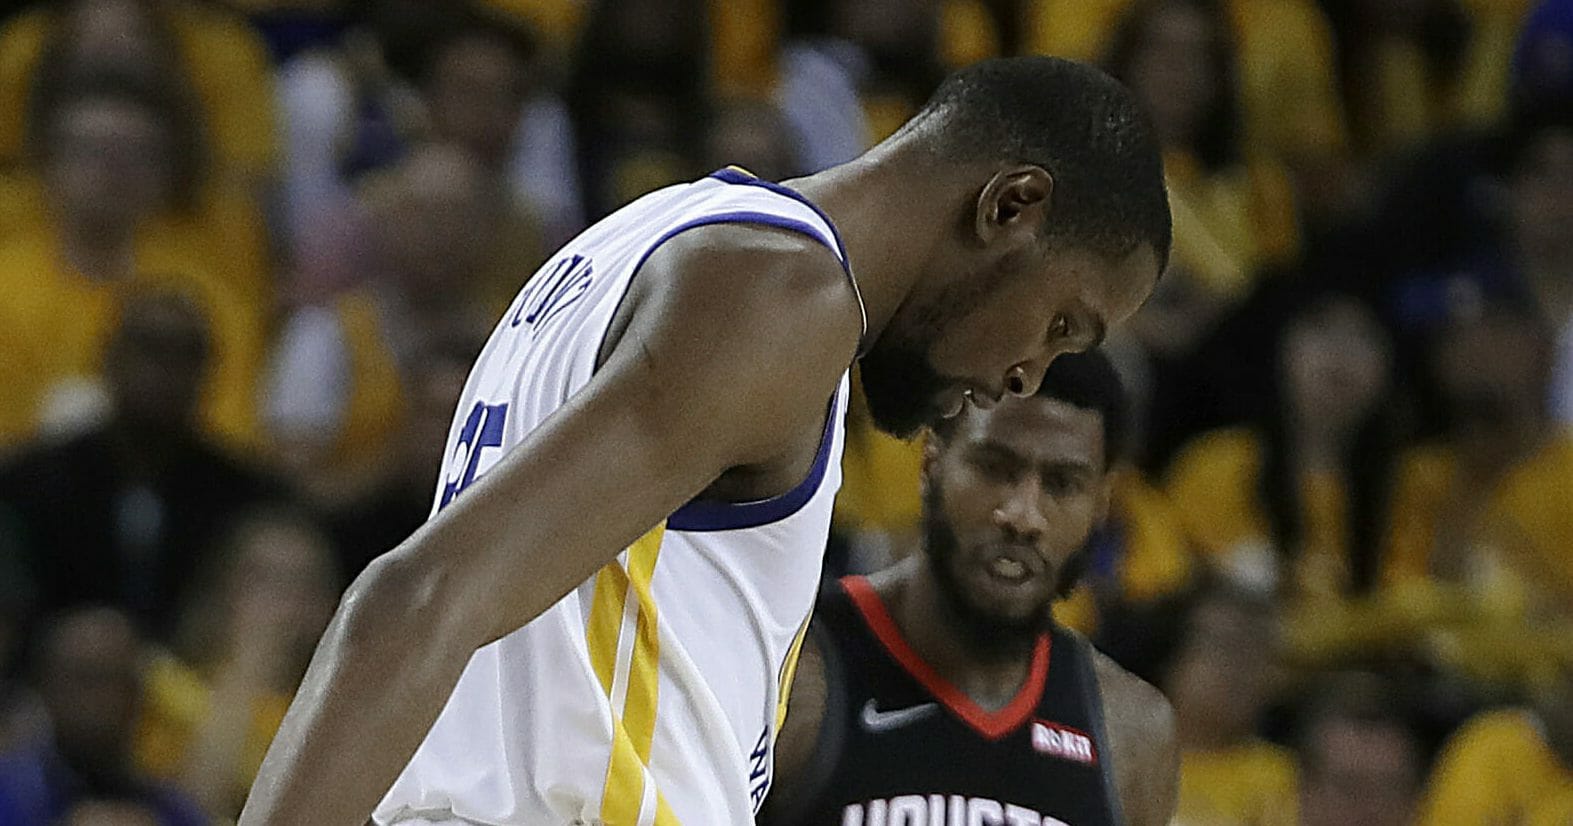 The Golden State Warriors' Kevin Durant limps off the court.